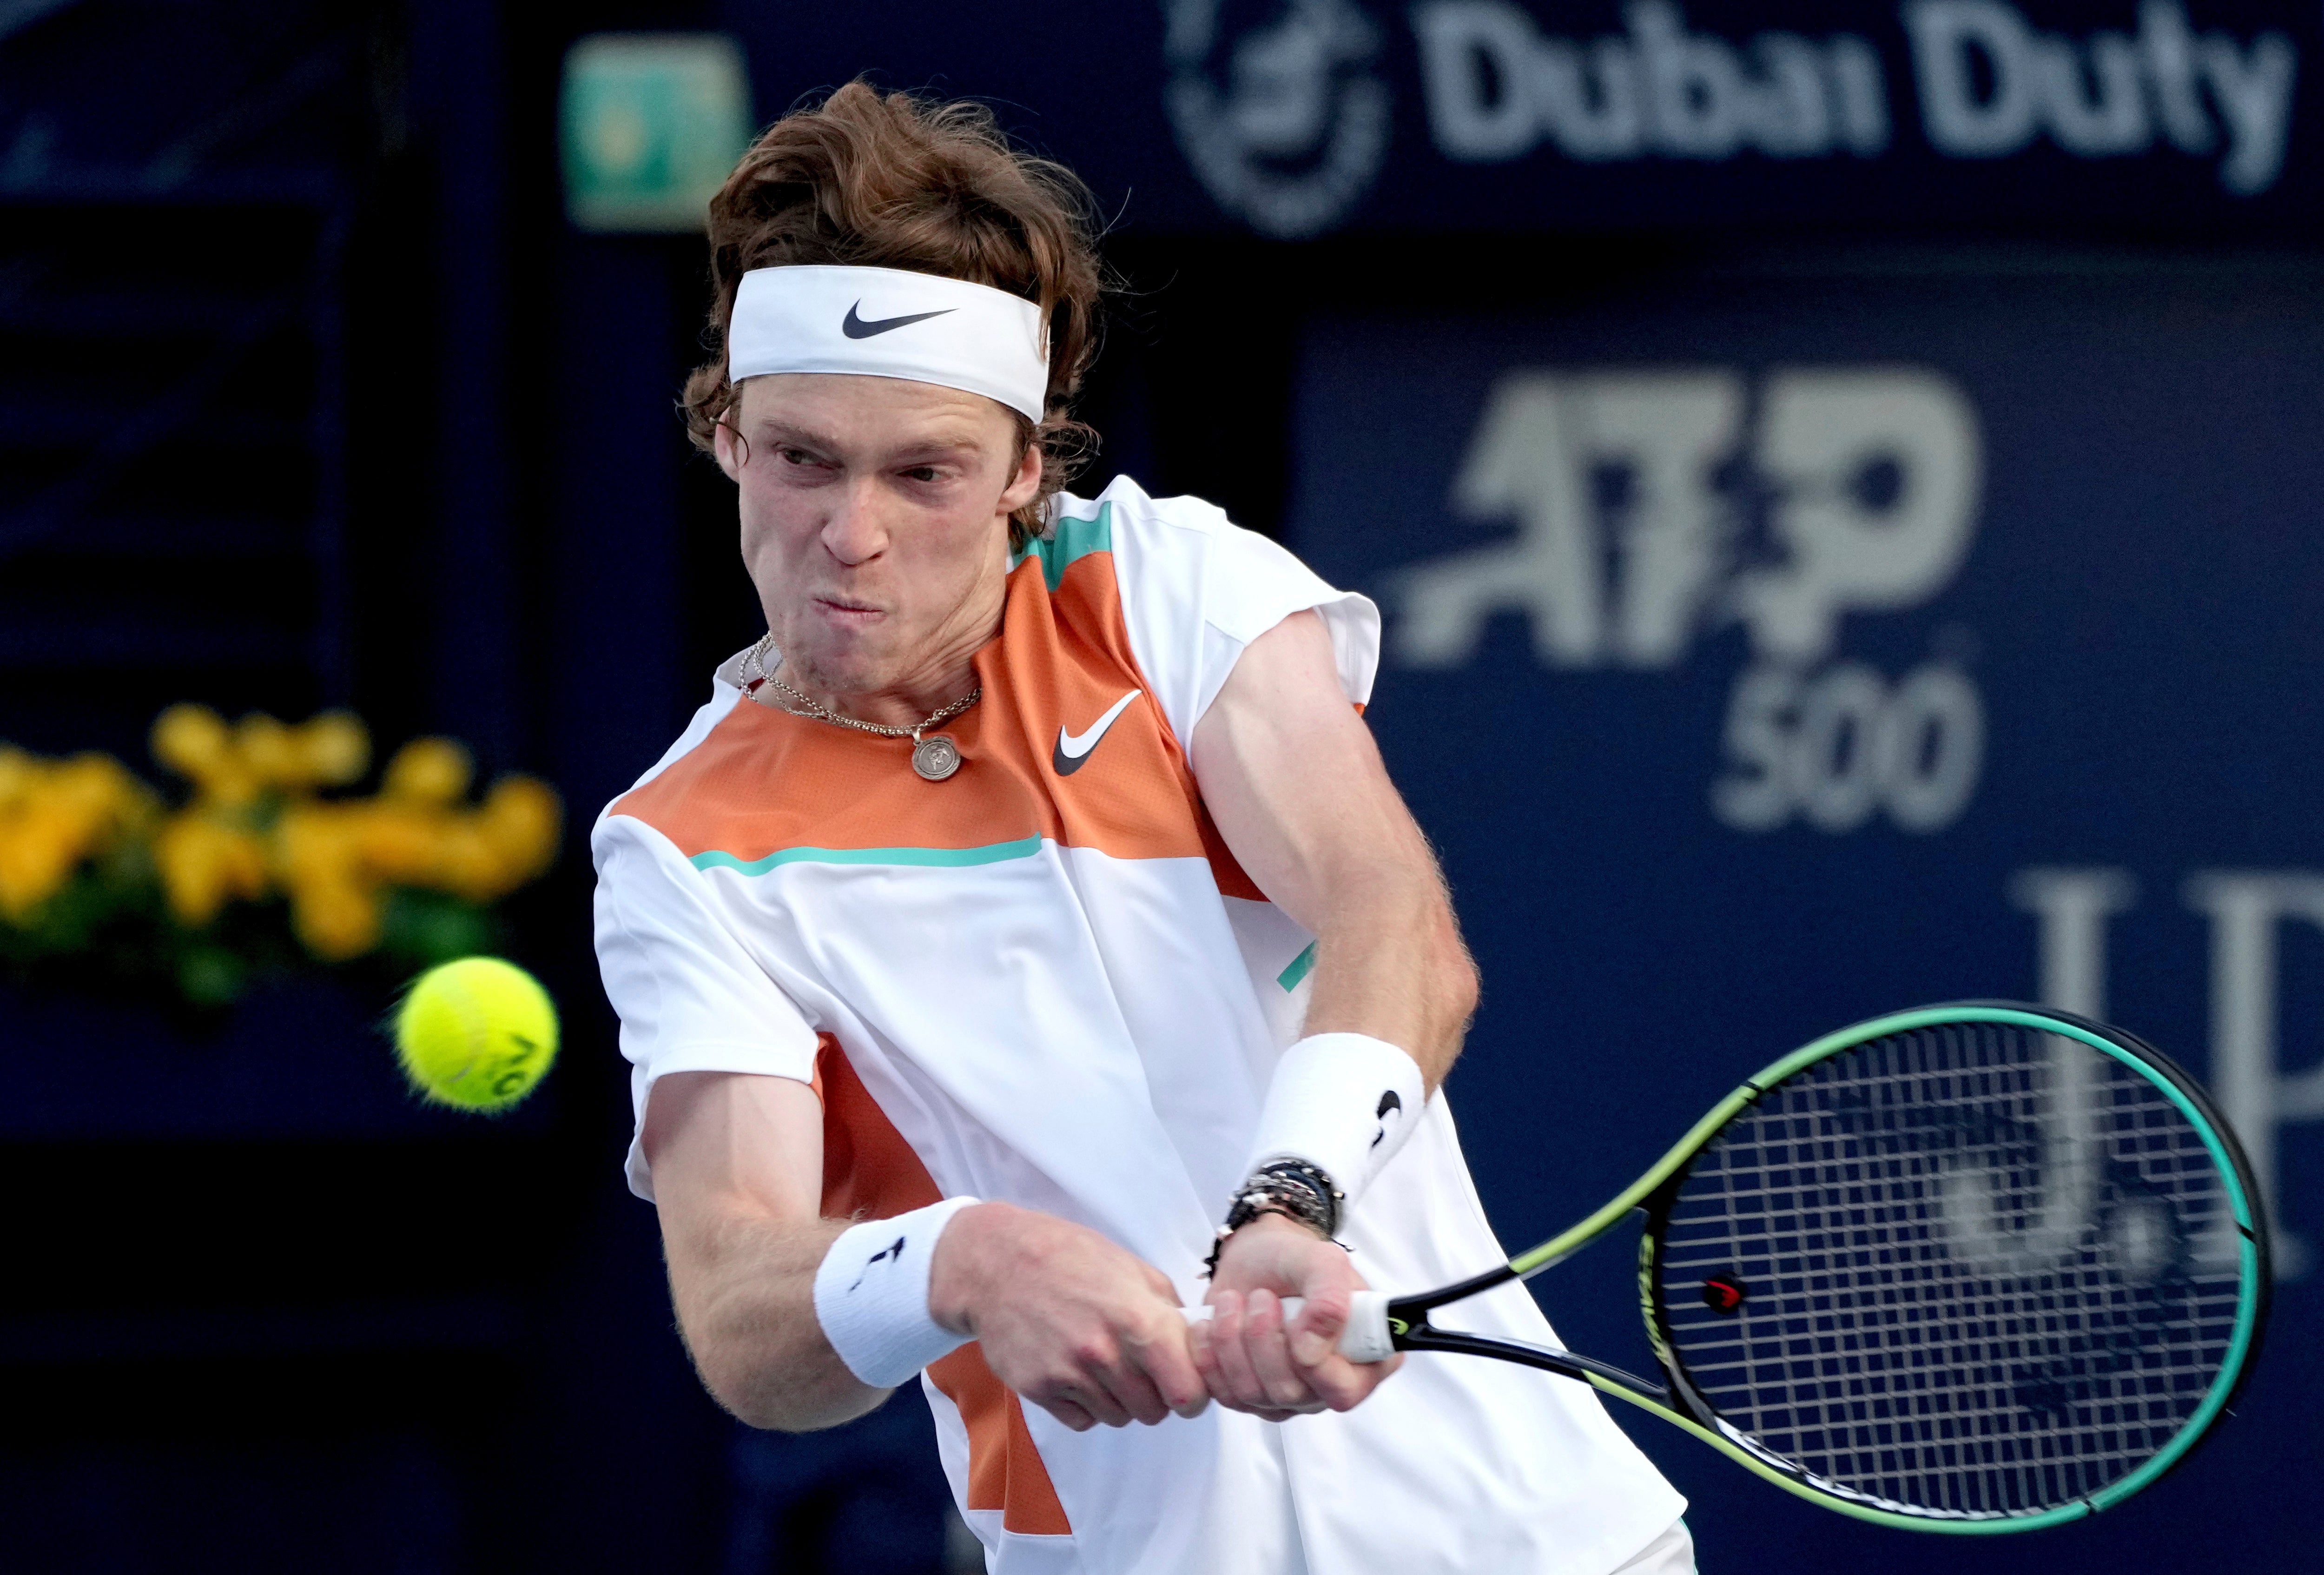 Andrey Rublev spoke about his desire for peace (Ebrahim Noroozi/AP)